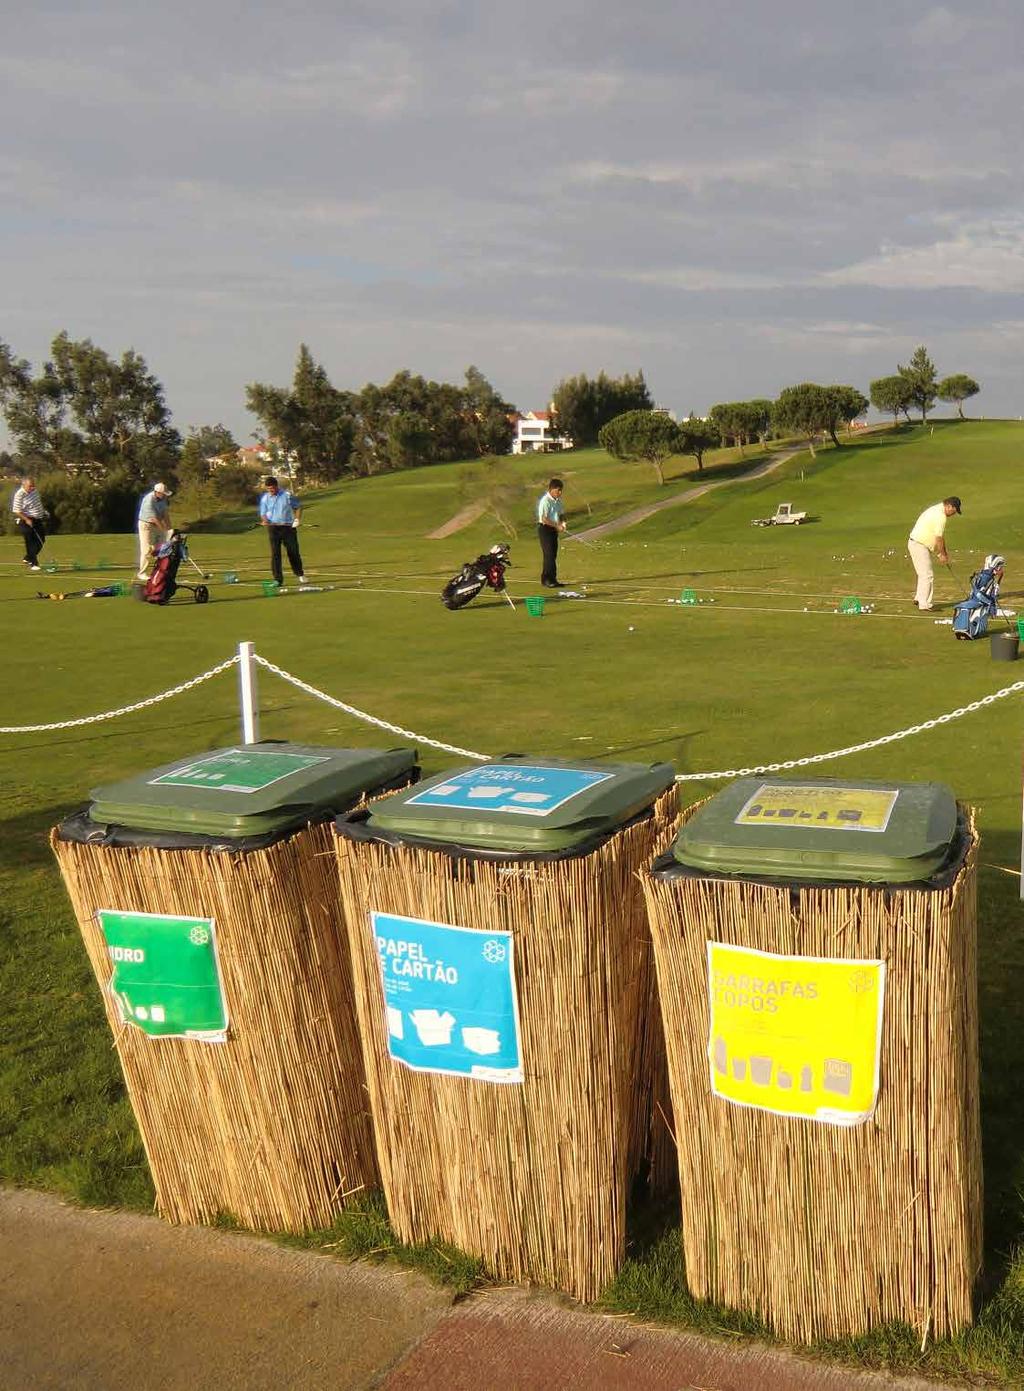 RESPONSIBLE GOLF COURSE MANAGEMENT IS ABOUT minimising... WASTE through reduction, re-use, and recycling. This will become the industry norm through awareness campaigns.